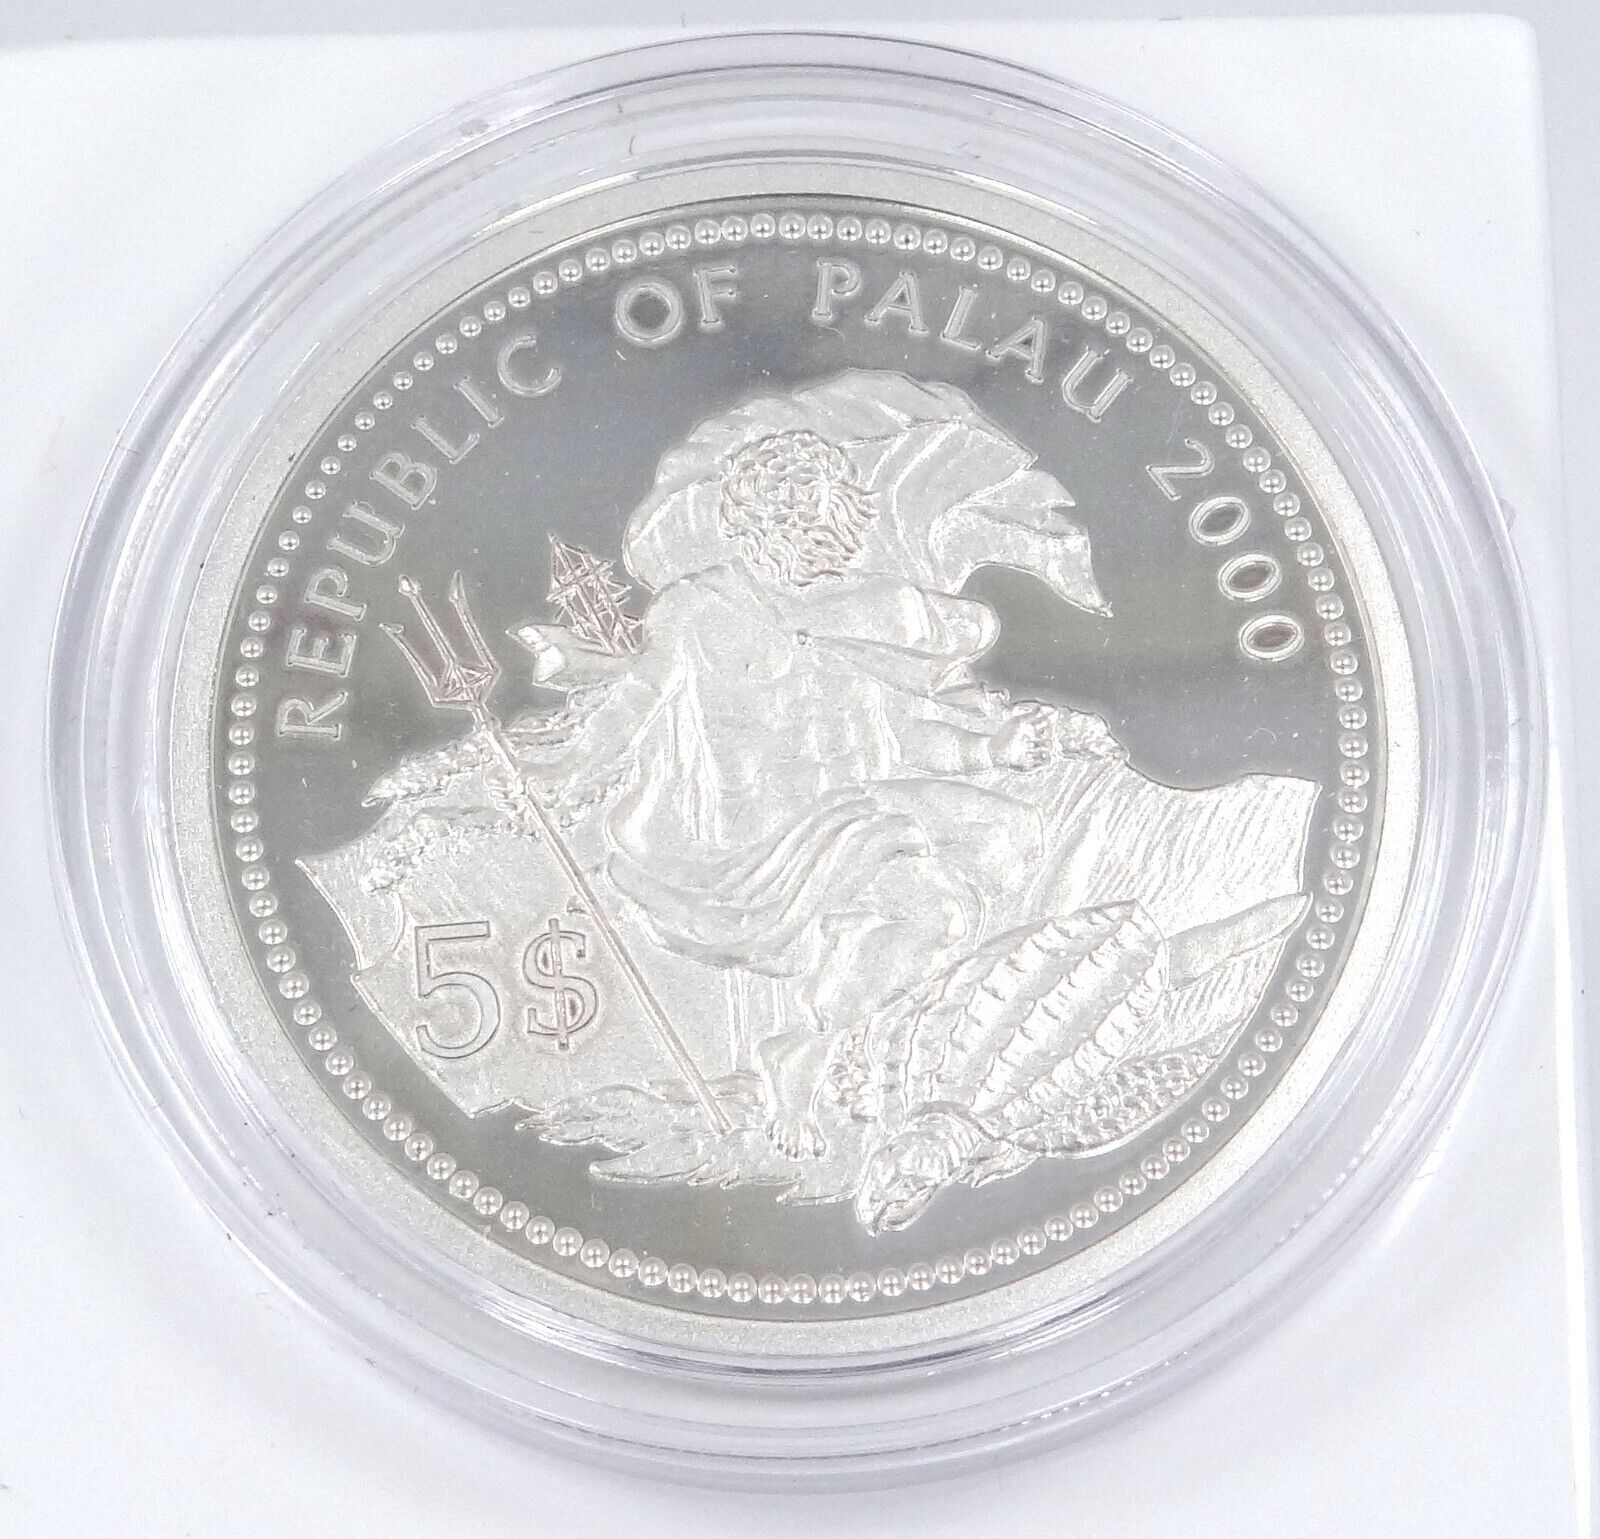 25g Silver Coin 2000 $5 Palau Color Proof Marine Life Protection-classypw.com-2